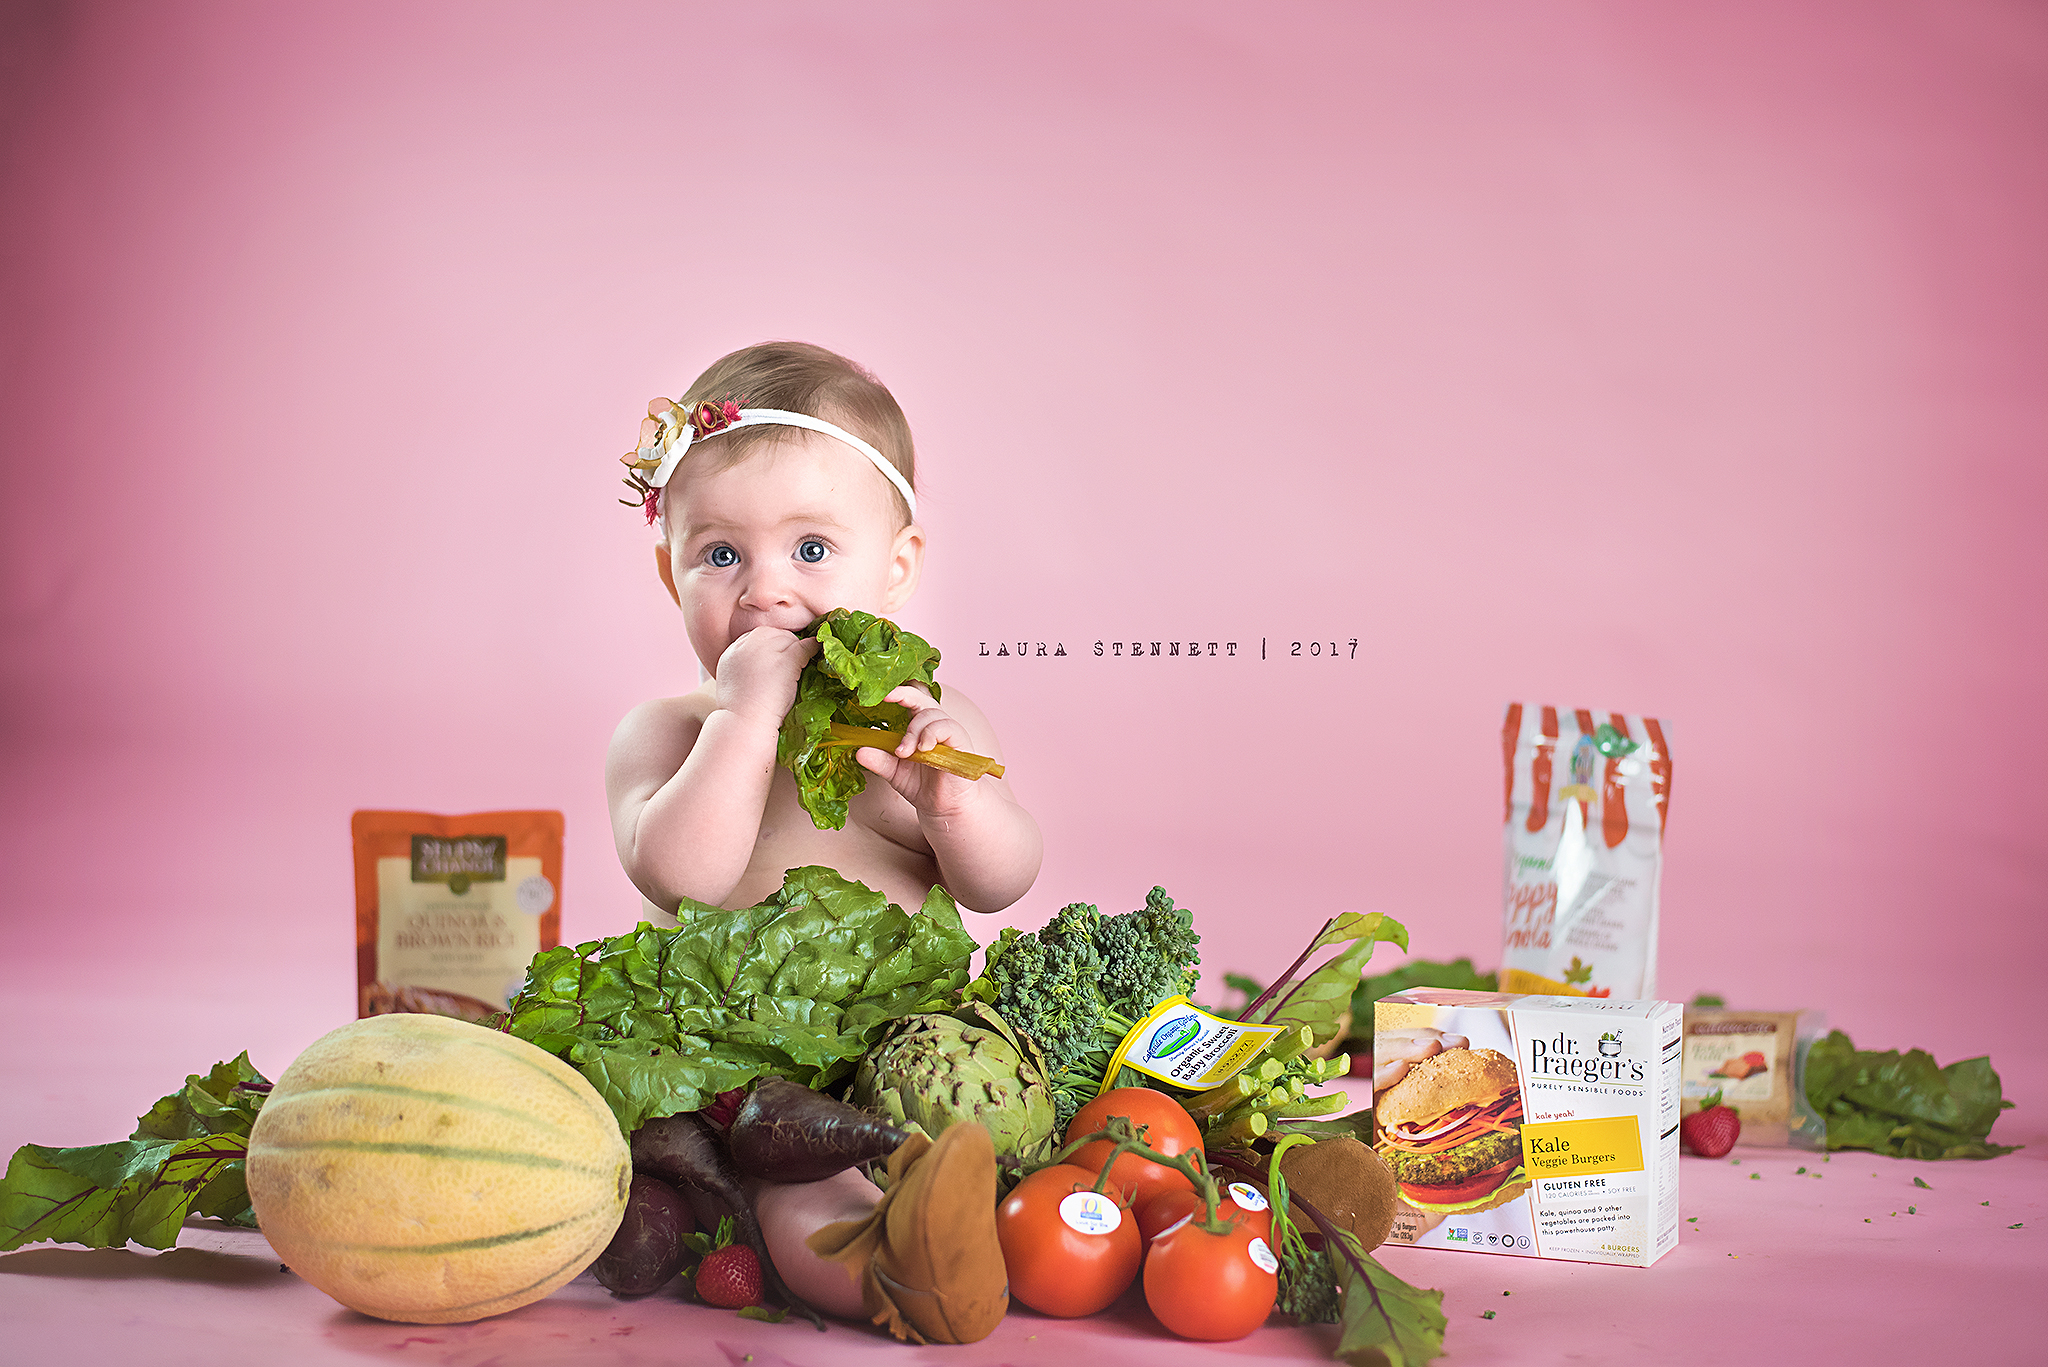 PHOTO: Mom Lauren Ashcraft responded to backlash about her son's cheeseburger-filled photo shoot with another organic vegetable photo shoot. 